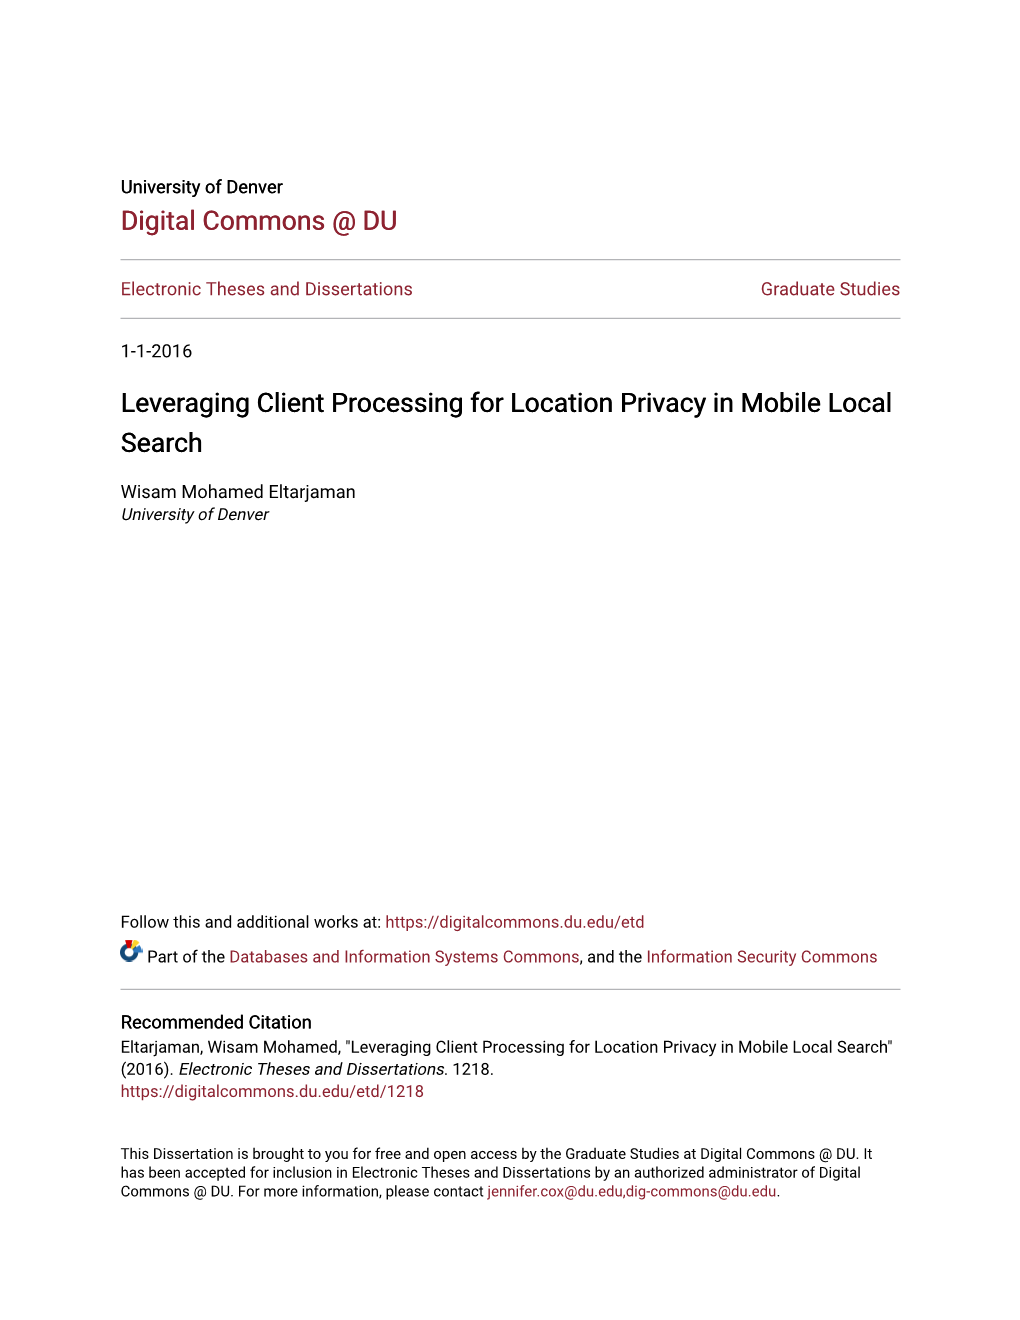 Leveraging Client Processing for Location Privacy in Mobile Local Search